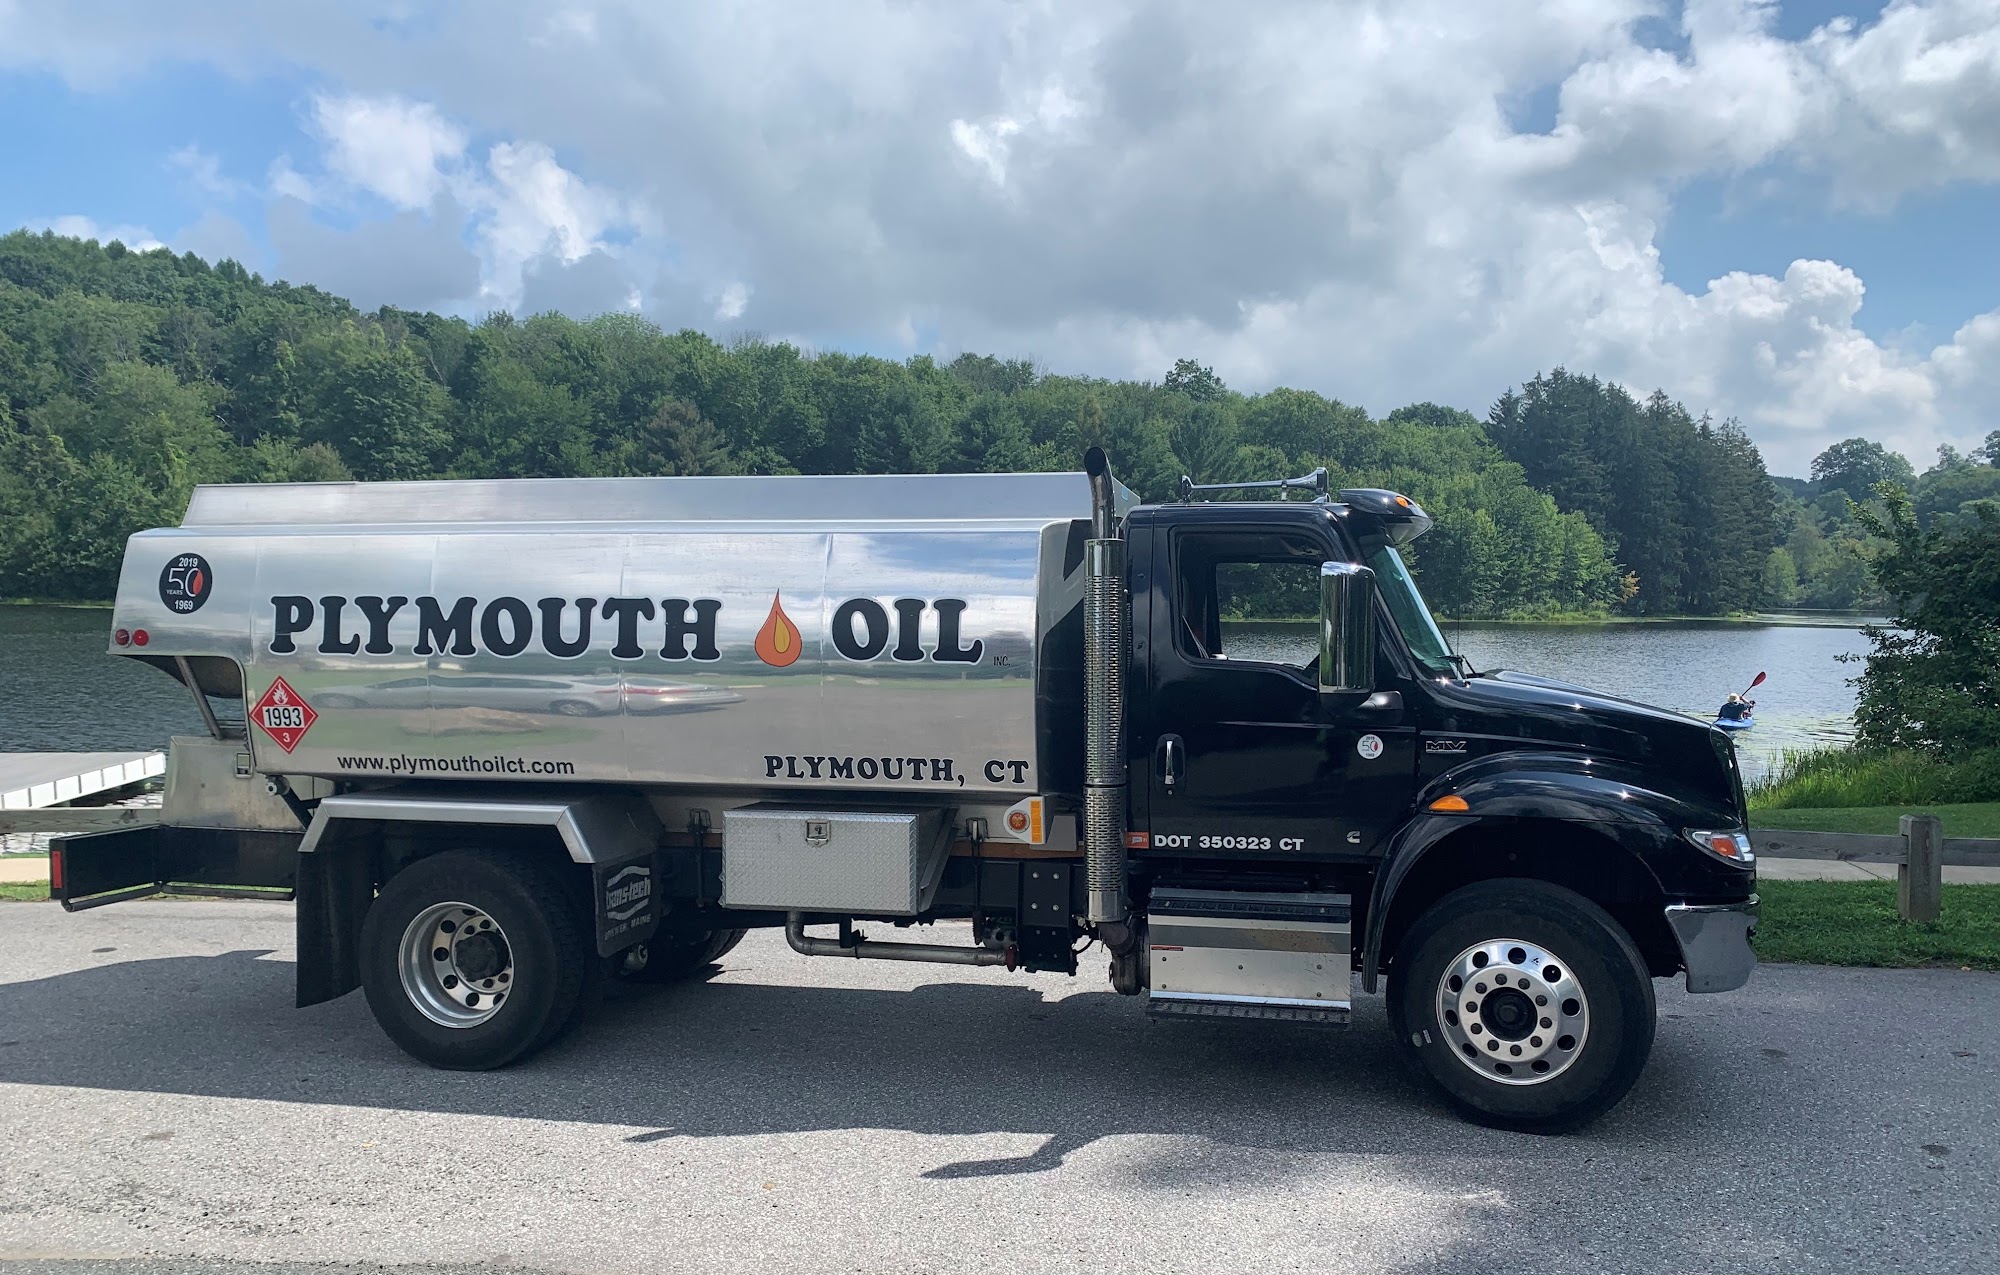 Plymouth Oil Services Inc 25 Burr Rd, Plymouth Connecticut 06782